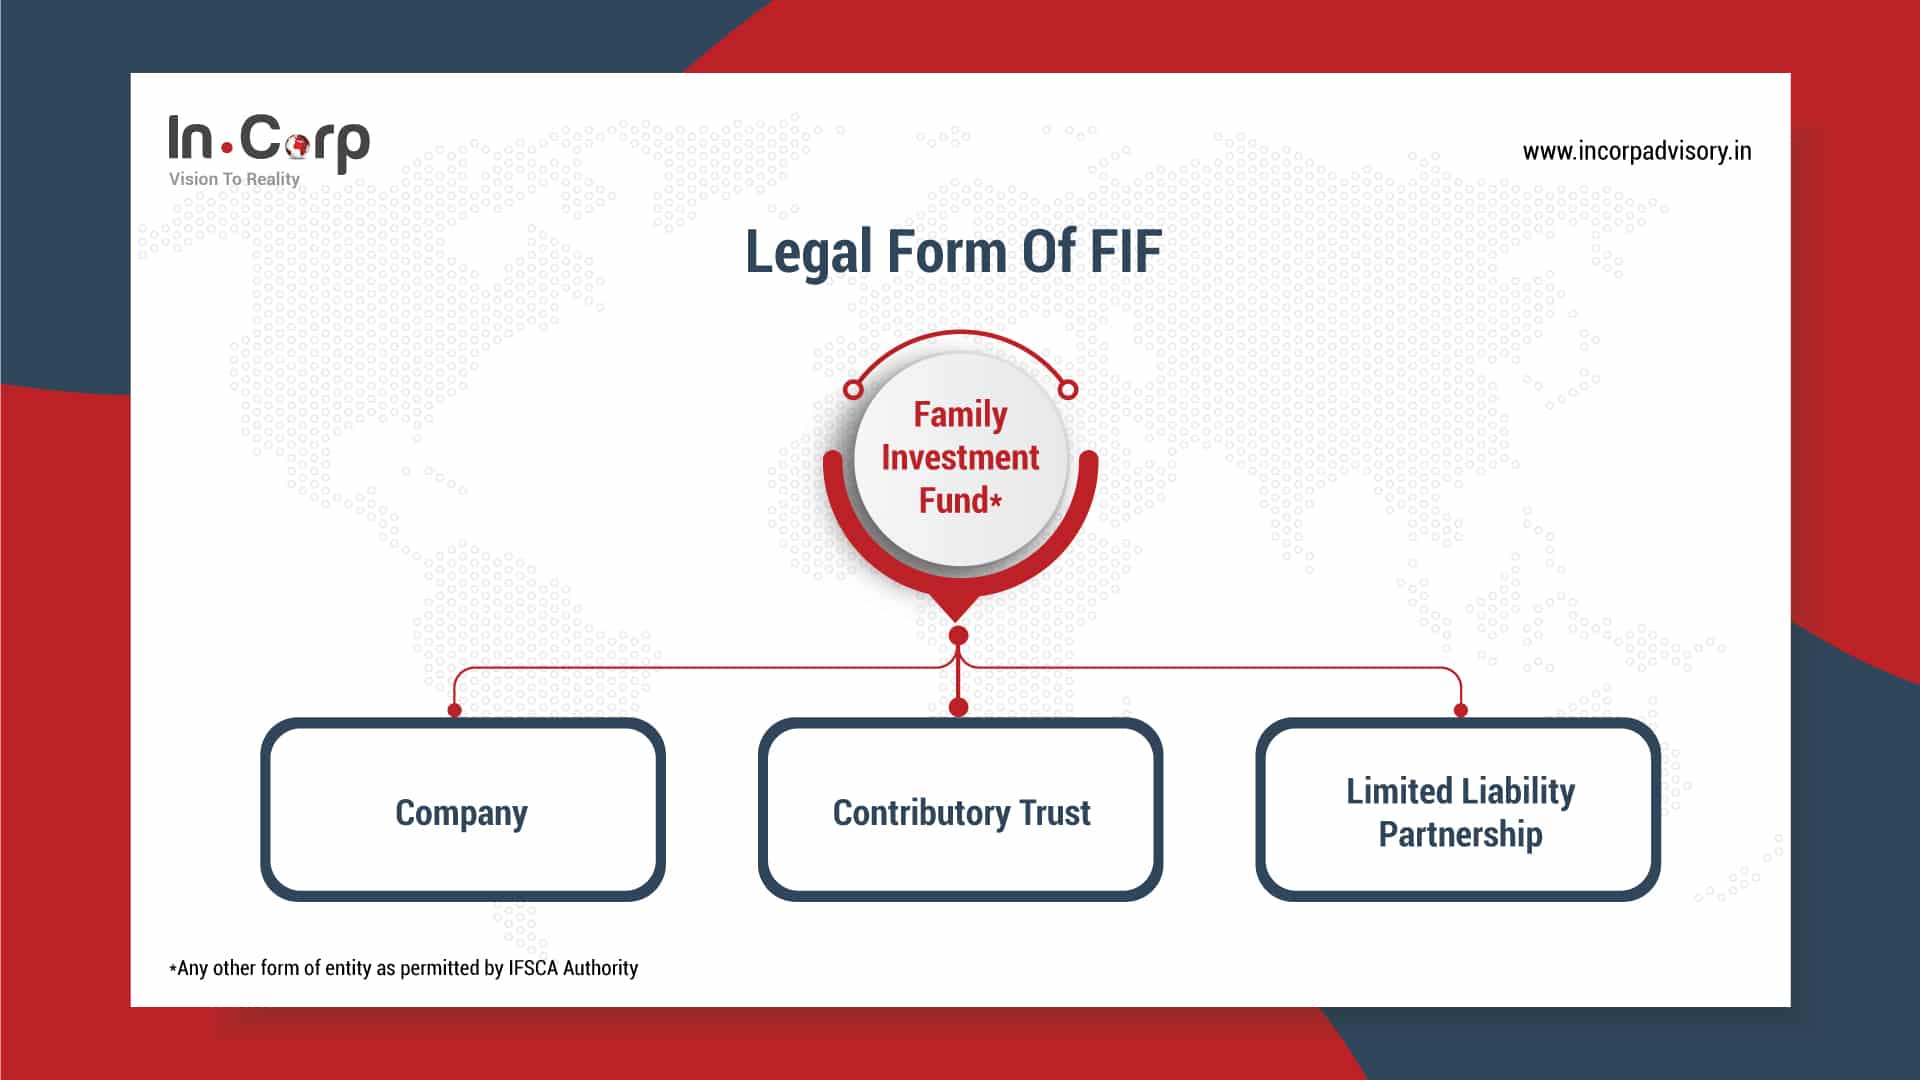 InCorp Family Investment Fund In IFSC GIFT City 2